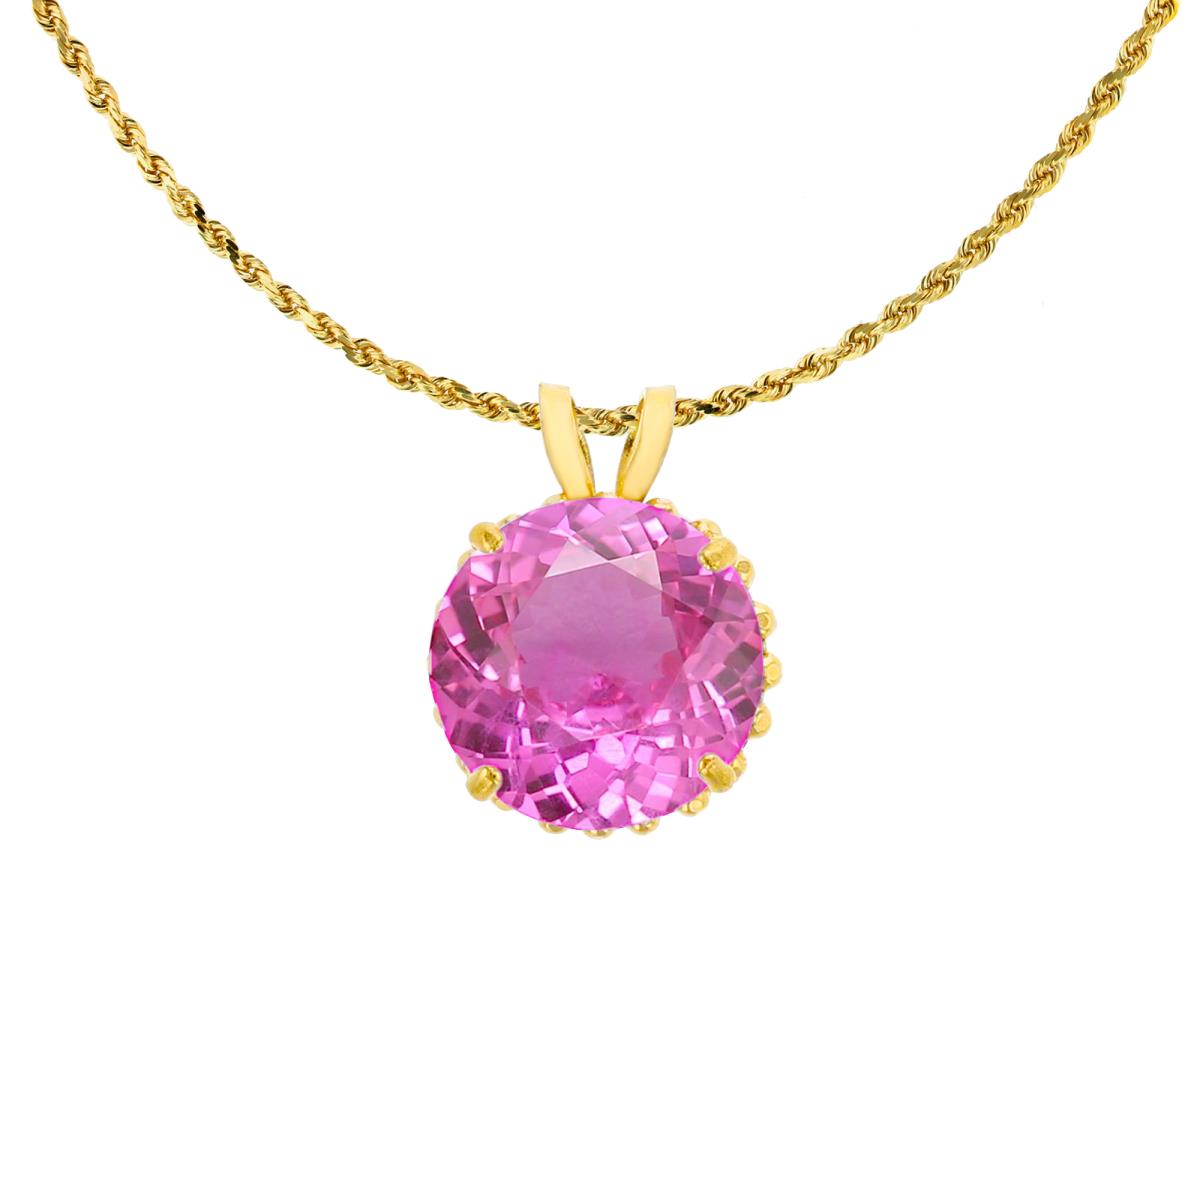 10K Yellow Gold 7mm Rd Cut Created Pink Sapphire with Bead Frame Rabbit Ear 18" Rope Chain Necklace